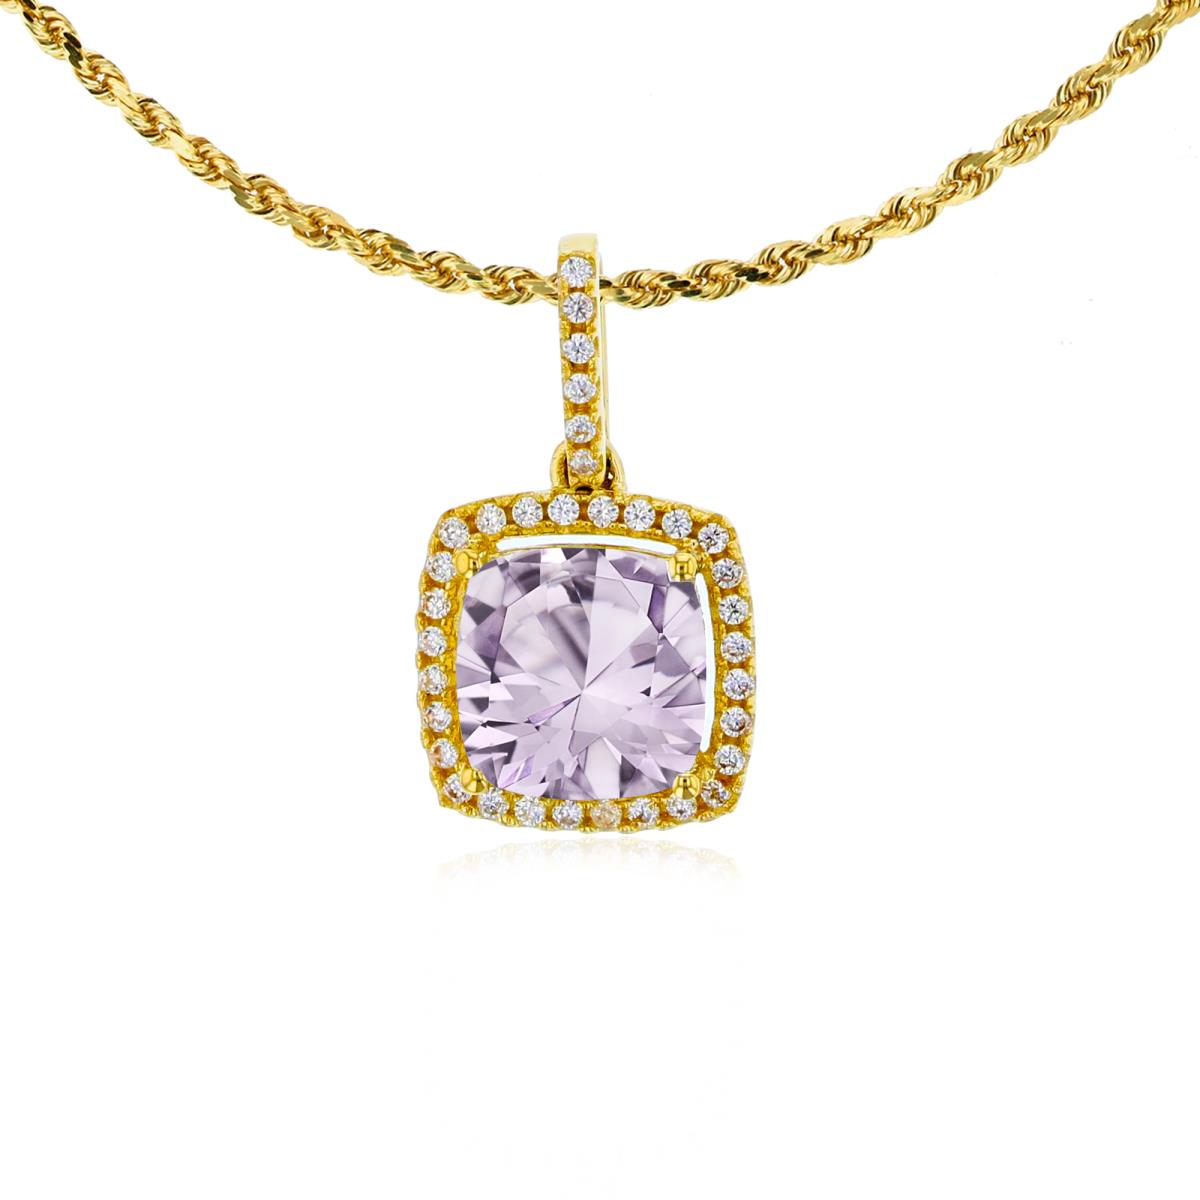 10K Yellow Gold 7mm Cushion Rose De France & 0.14 CTTW Rnd Diamond Halo 18" Rope Chain Necklace